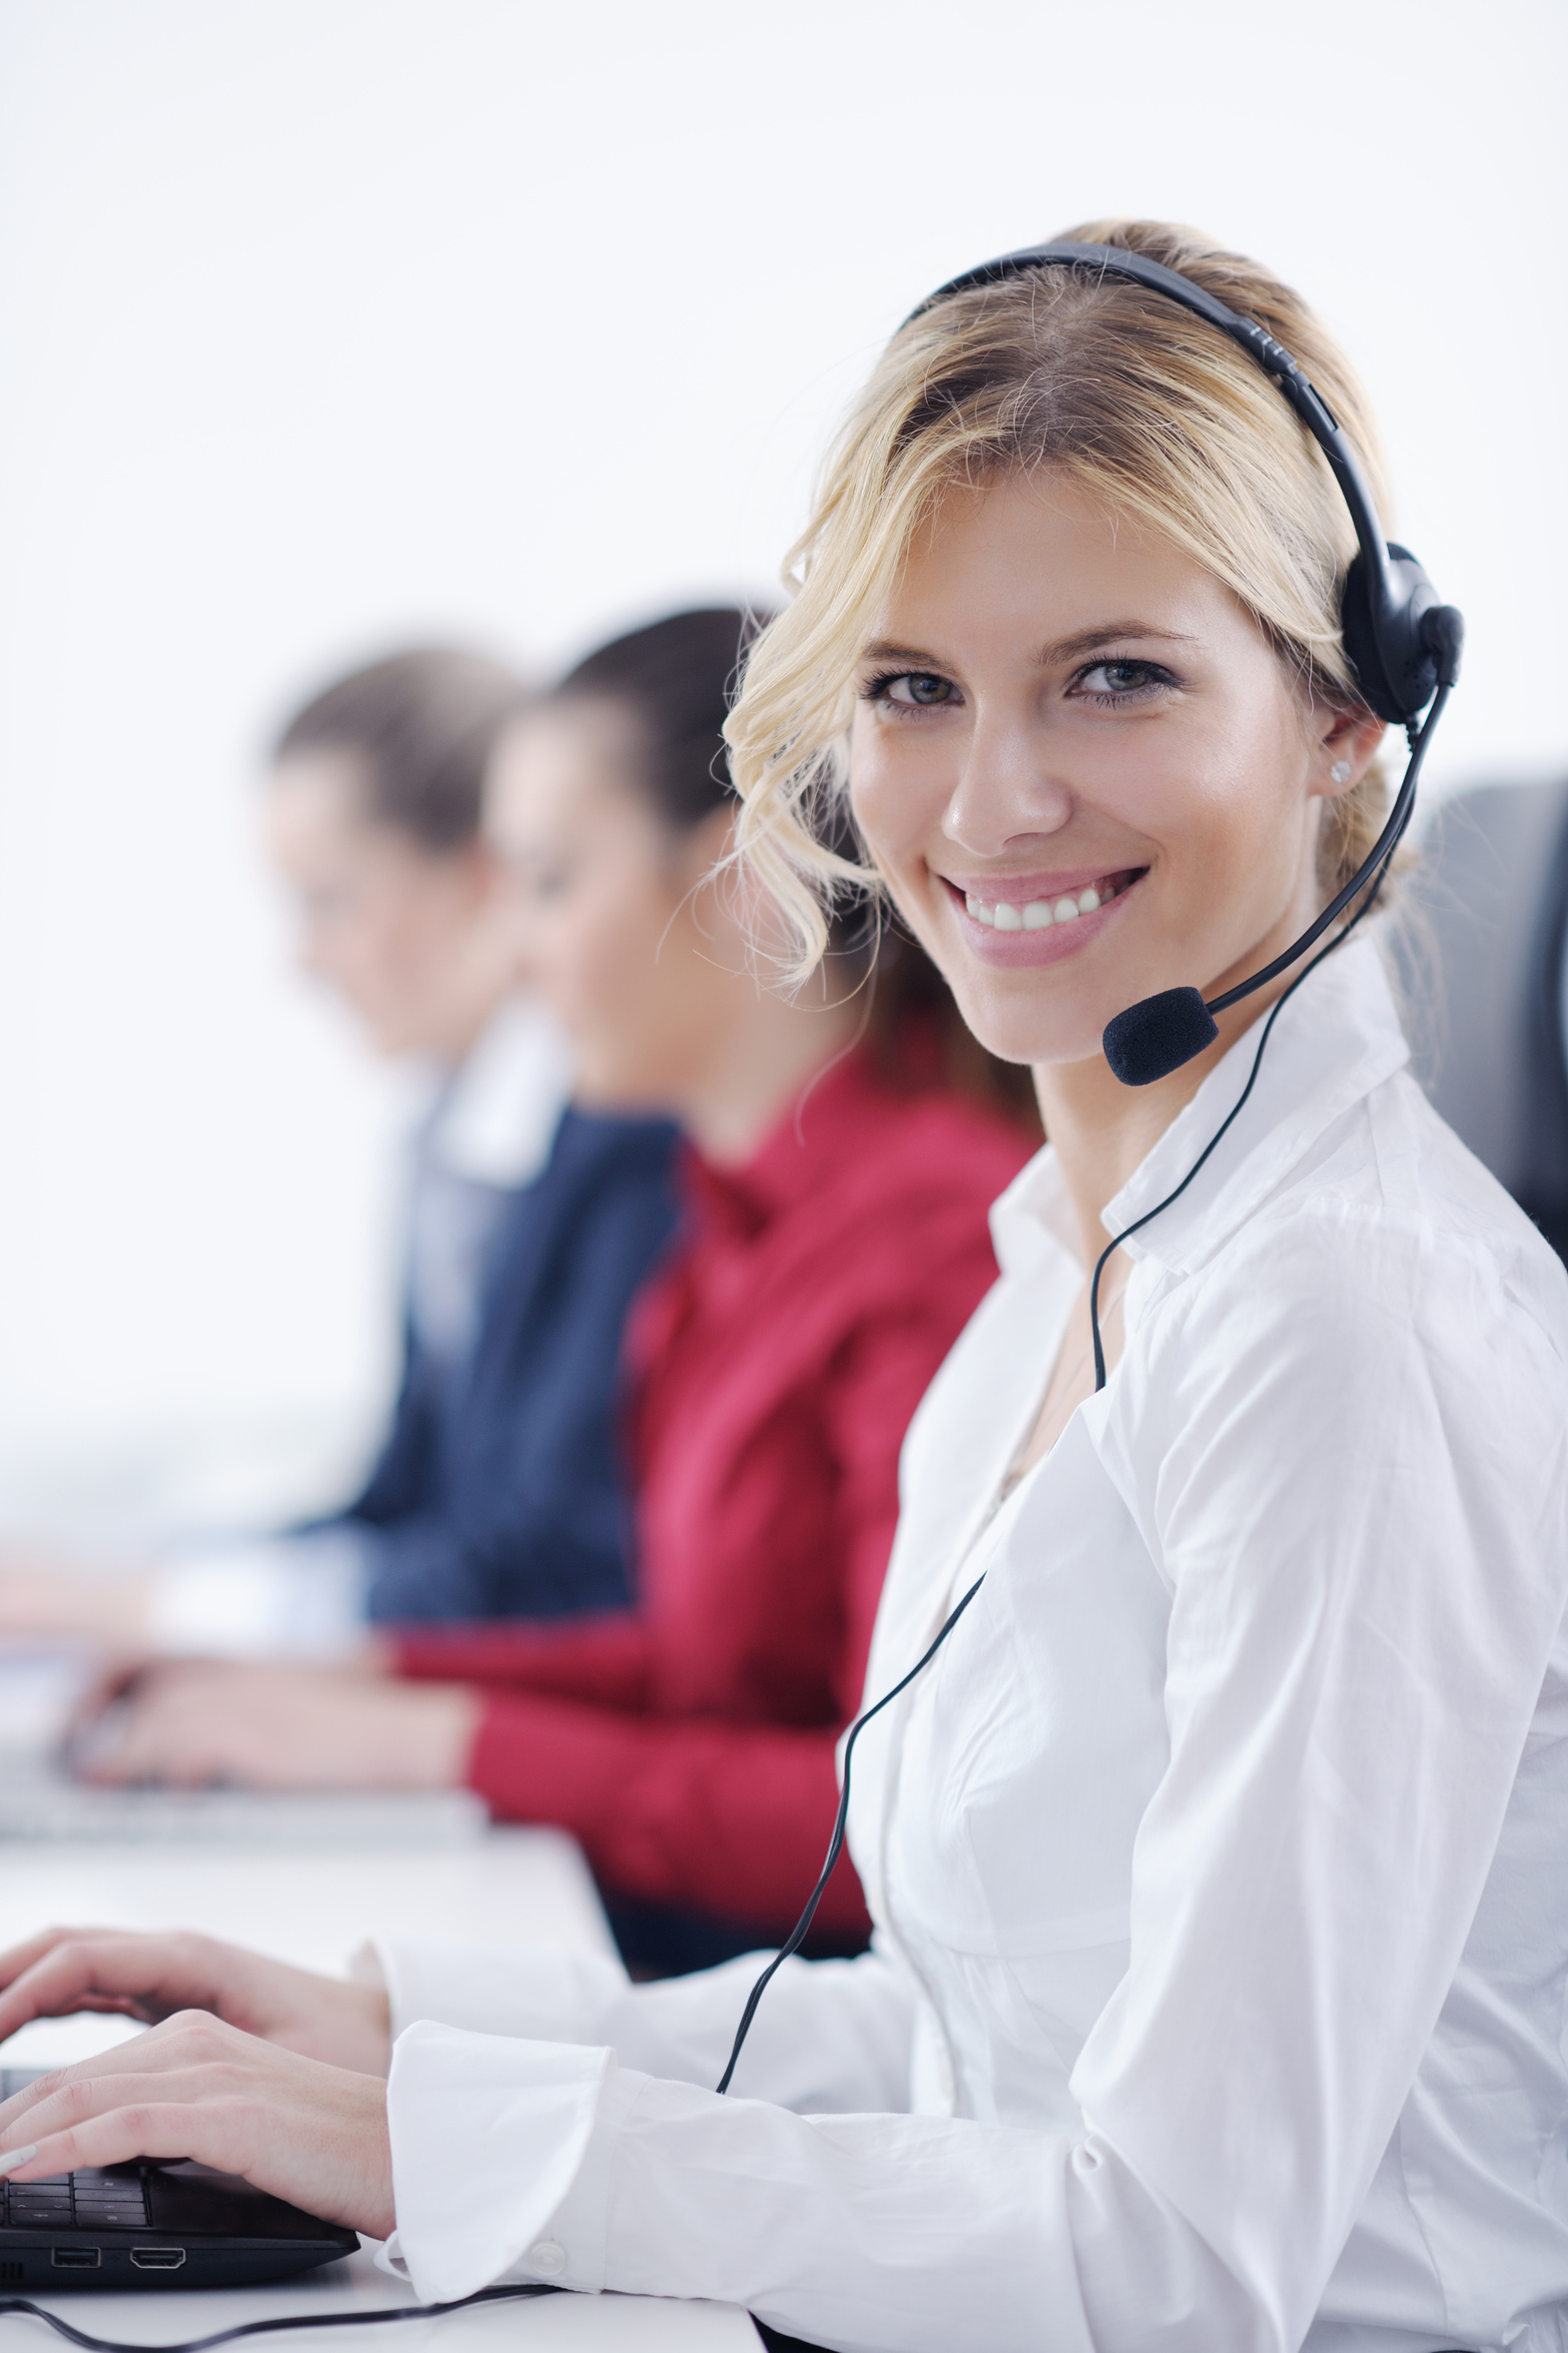 business woman group with headphones